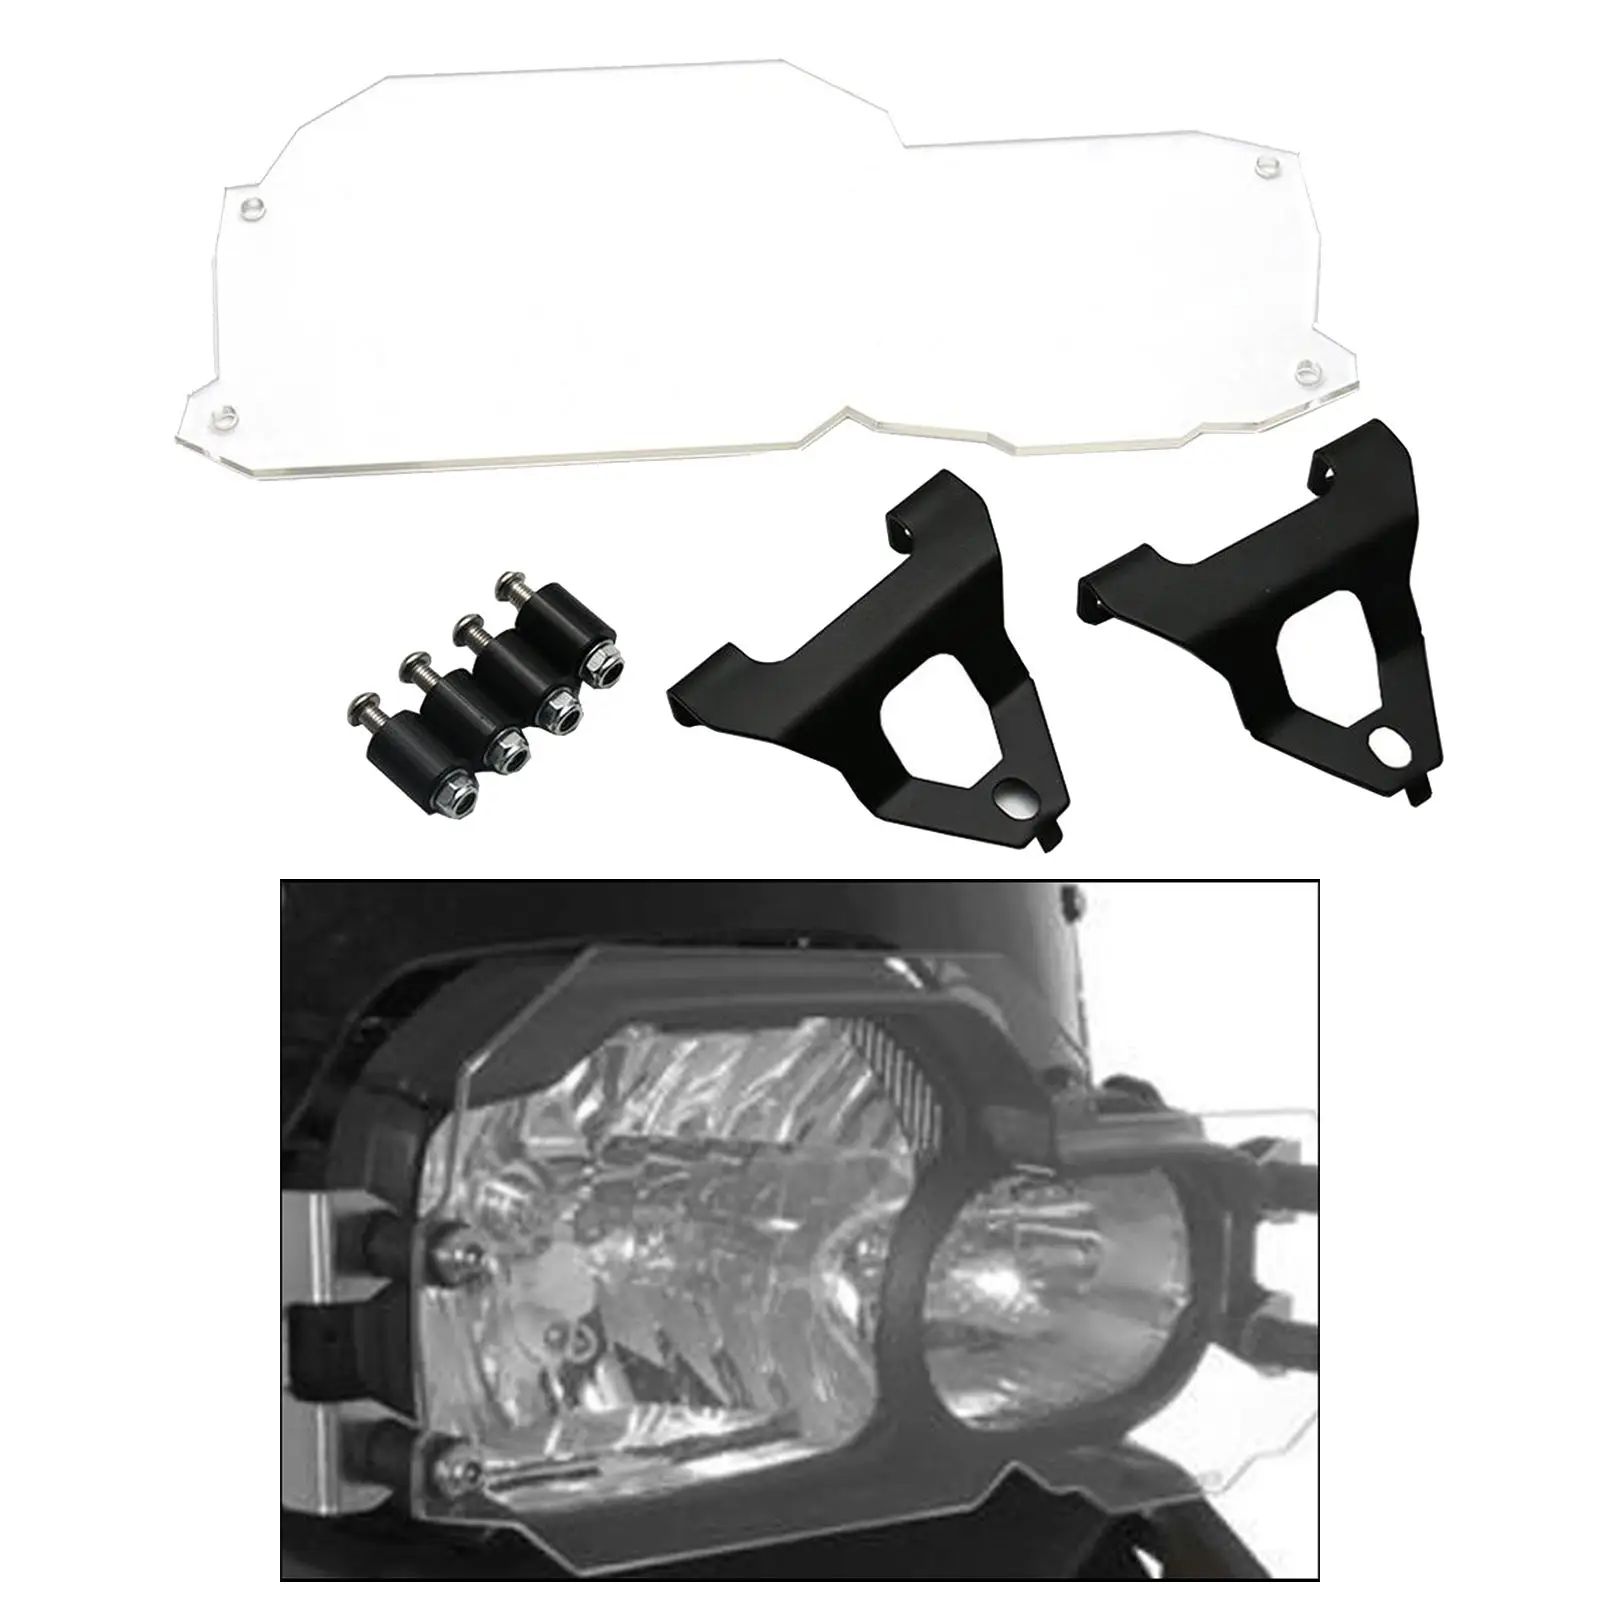 Clear Motorcycle Accessories Headlight Lamp Protector Guard Head Light Cover Grill Kit for BMW F650GS /F700GS 08 - 17